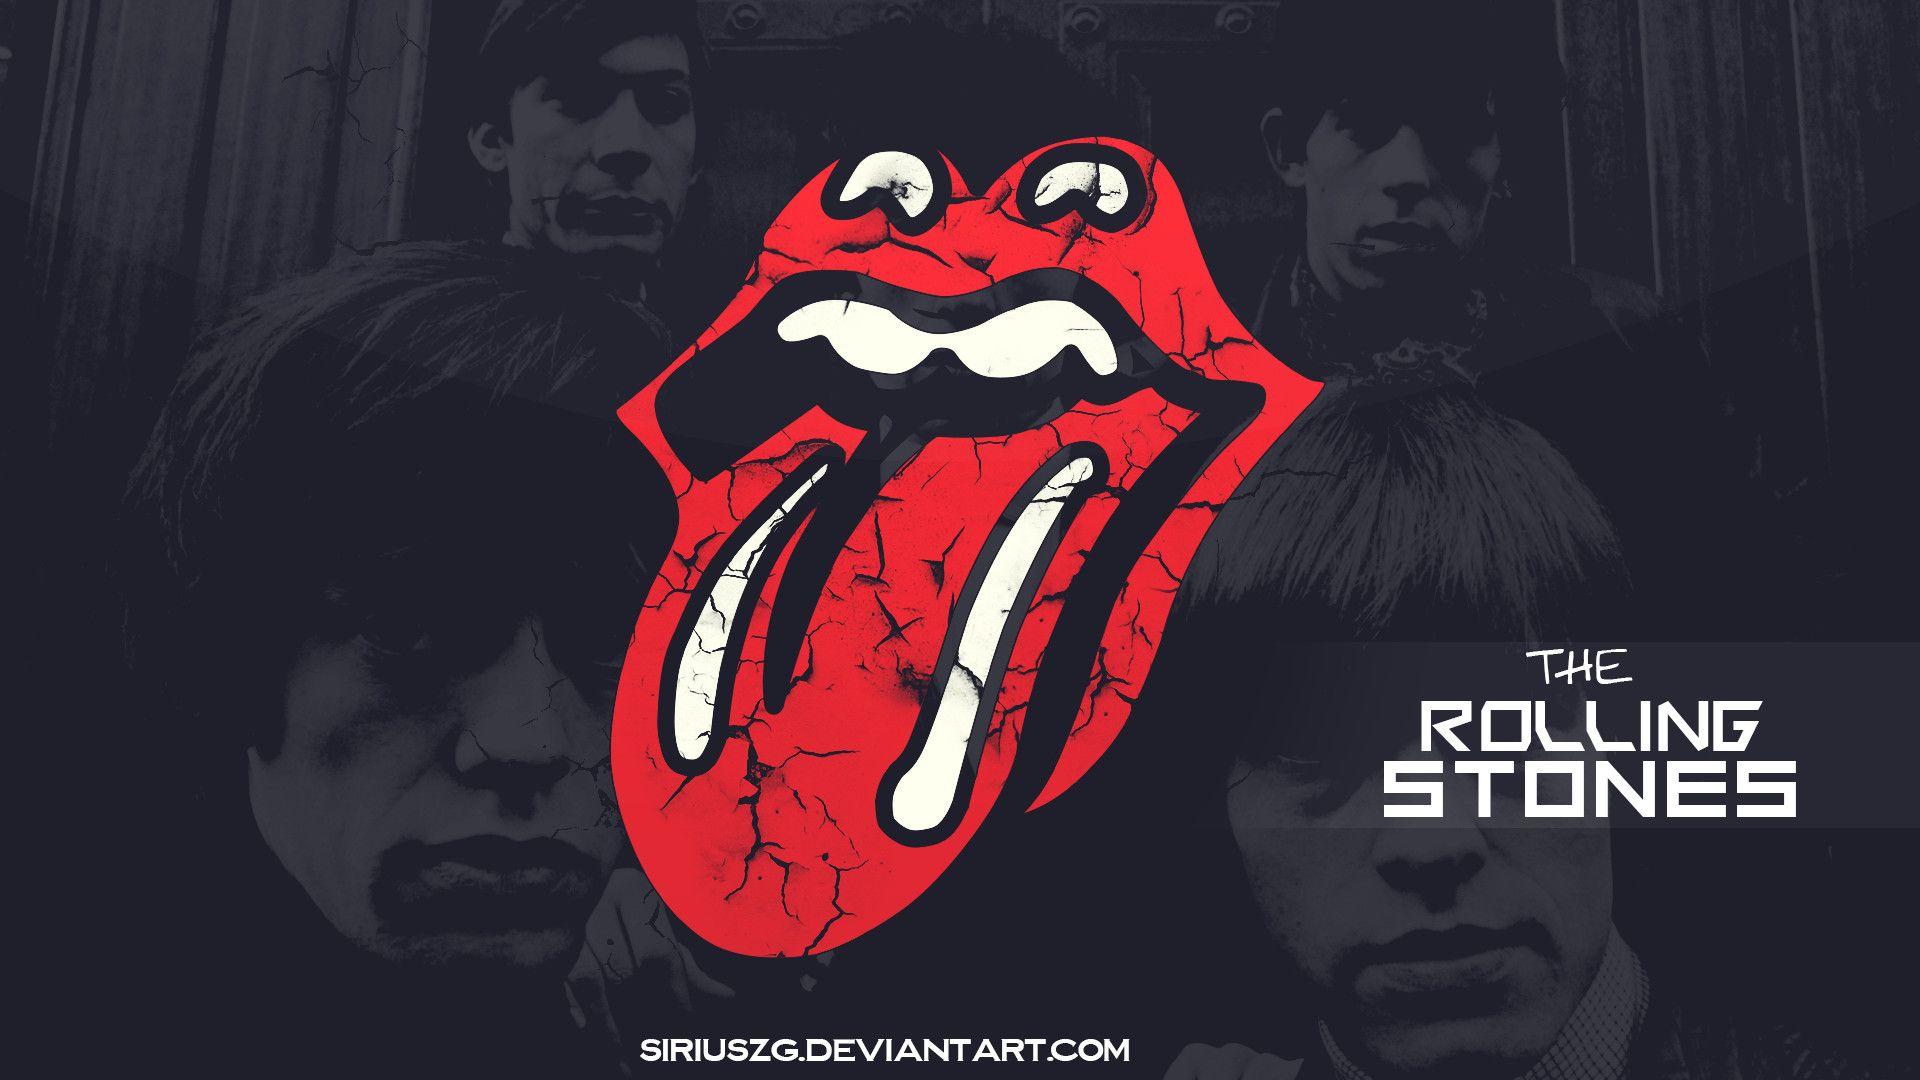 Rolling Stones Wallpapers Top Free Rolling Stones Backgrounds Wallpaperaccess